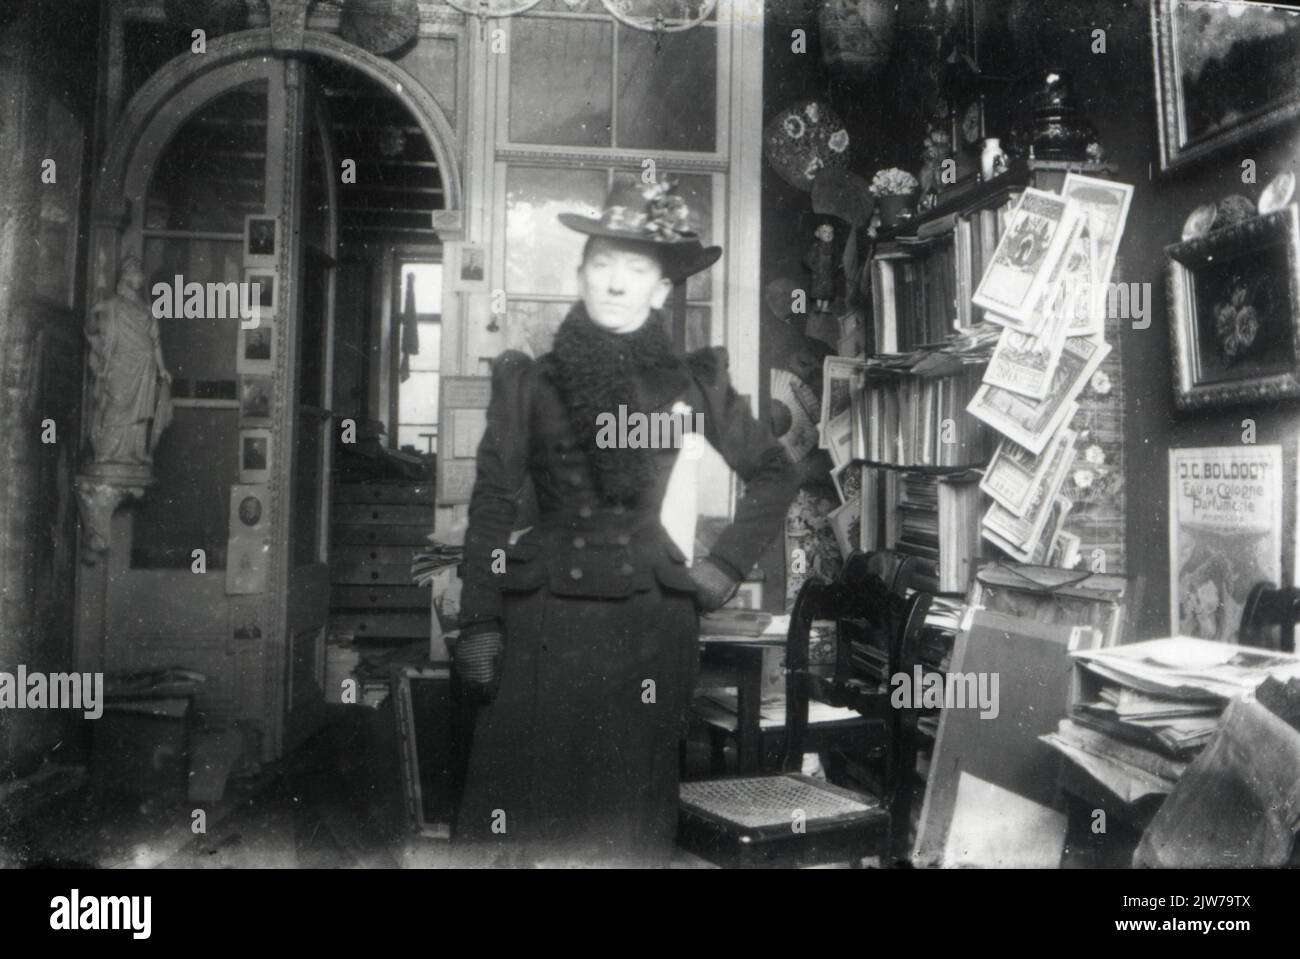 Image of (presumably) ant. Haas in the shop of the Streensprintkerij Joh.a. Moesman (Neude 7) in Utrecht.n.b. Ant. Haas rented room to students in the house Kromme Nieuwegracht 12. Stock Photo